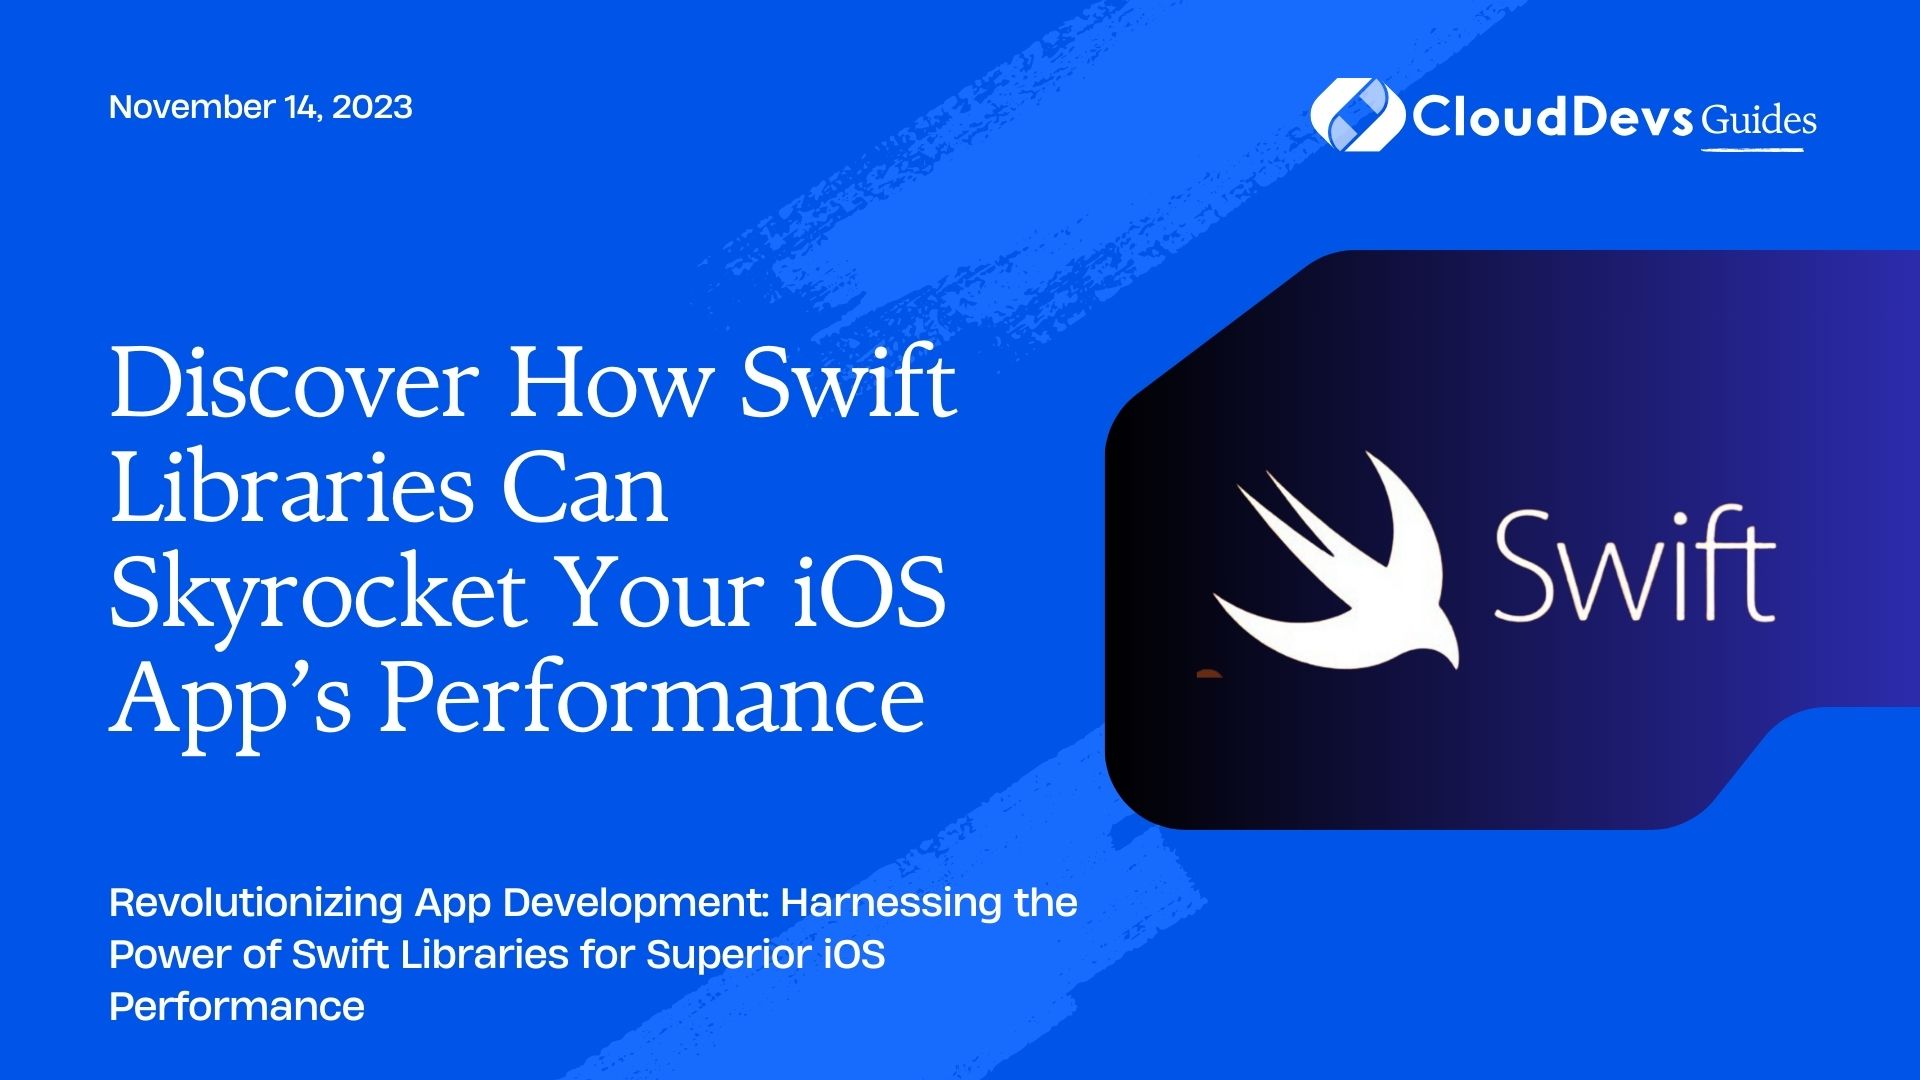 Discover How Swift Libraries Can Skyrocket Your iOS App’s Performance